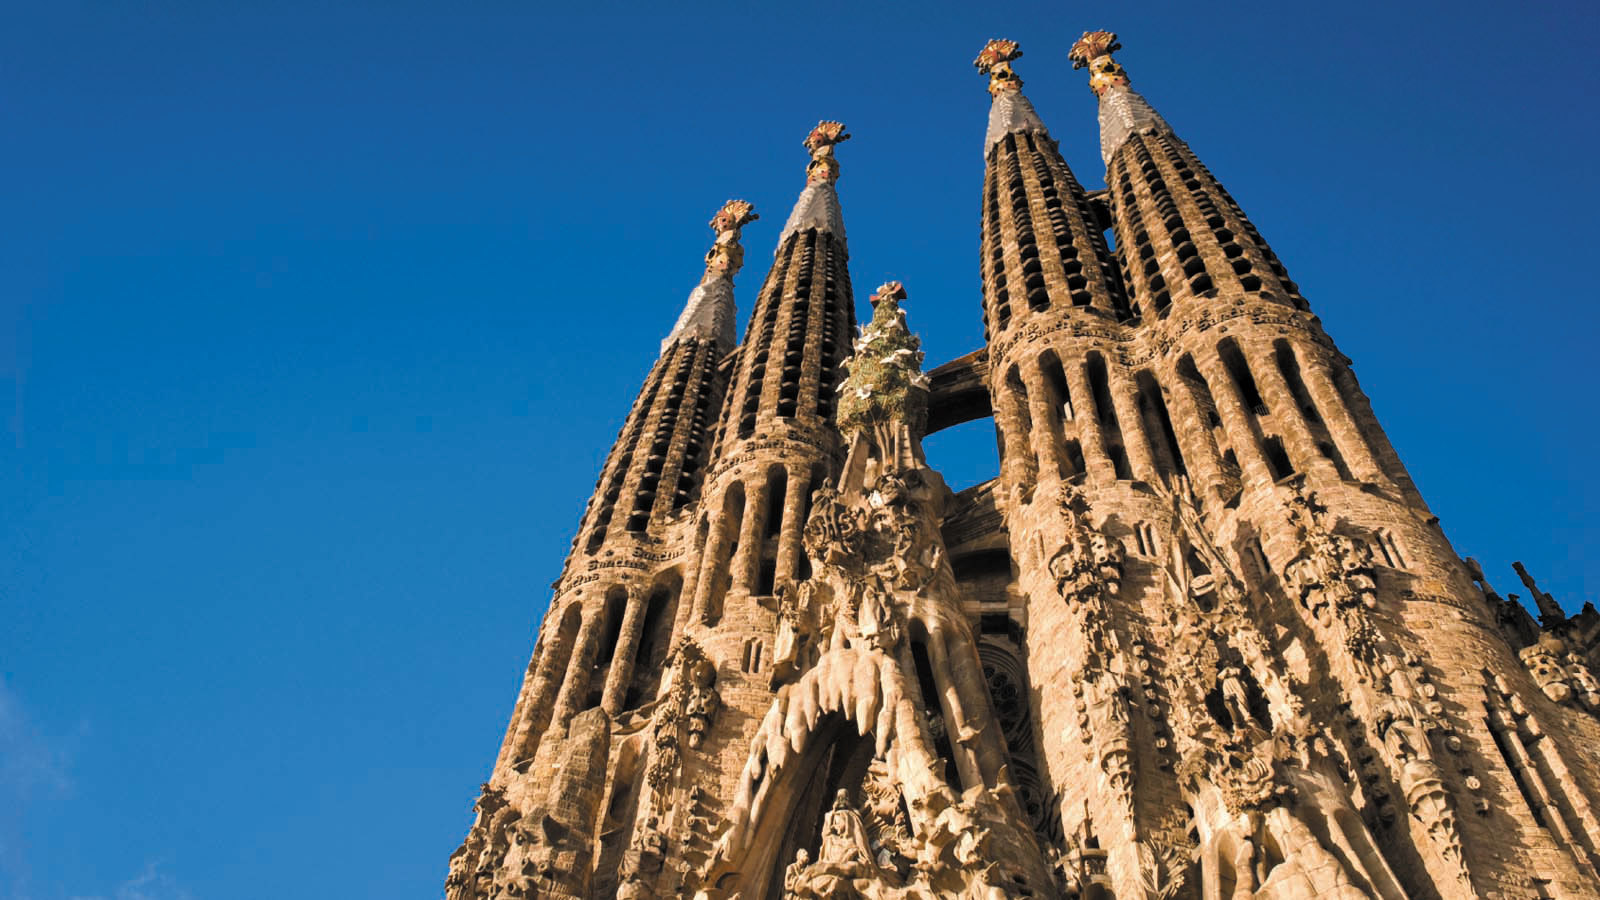 The Best of Barcelona Tour